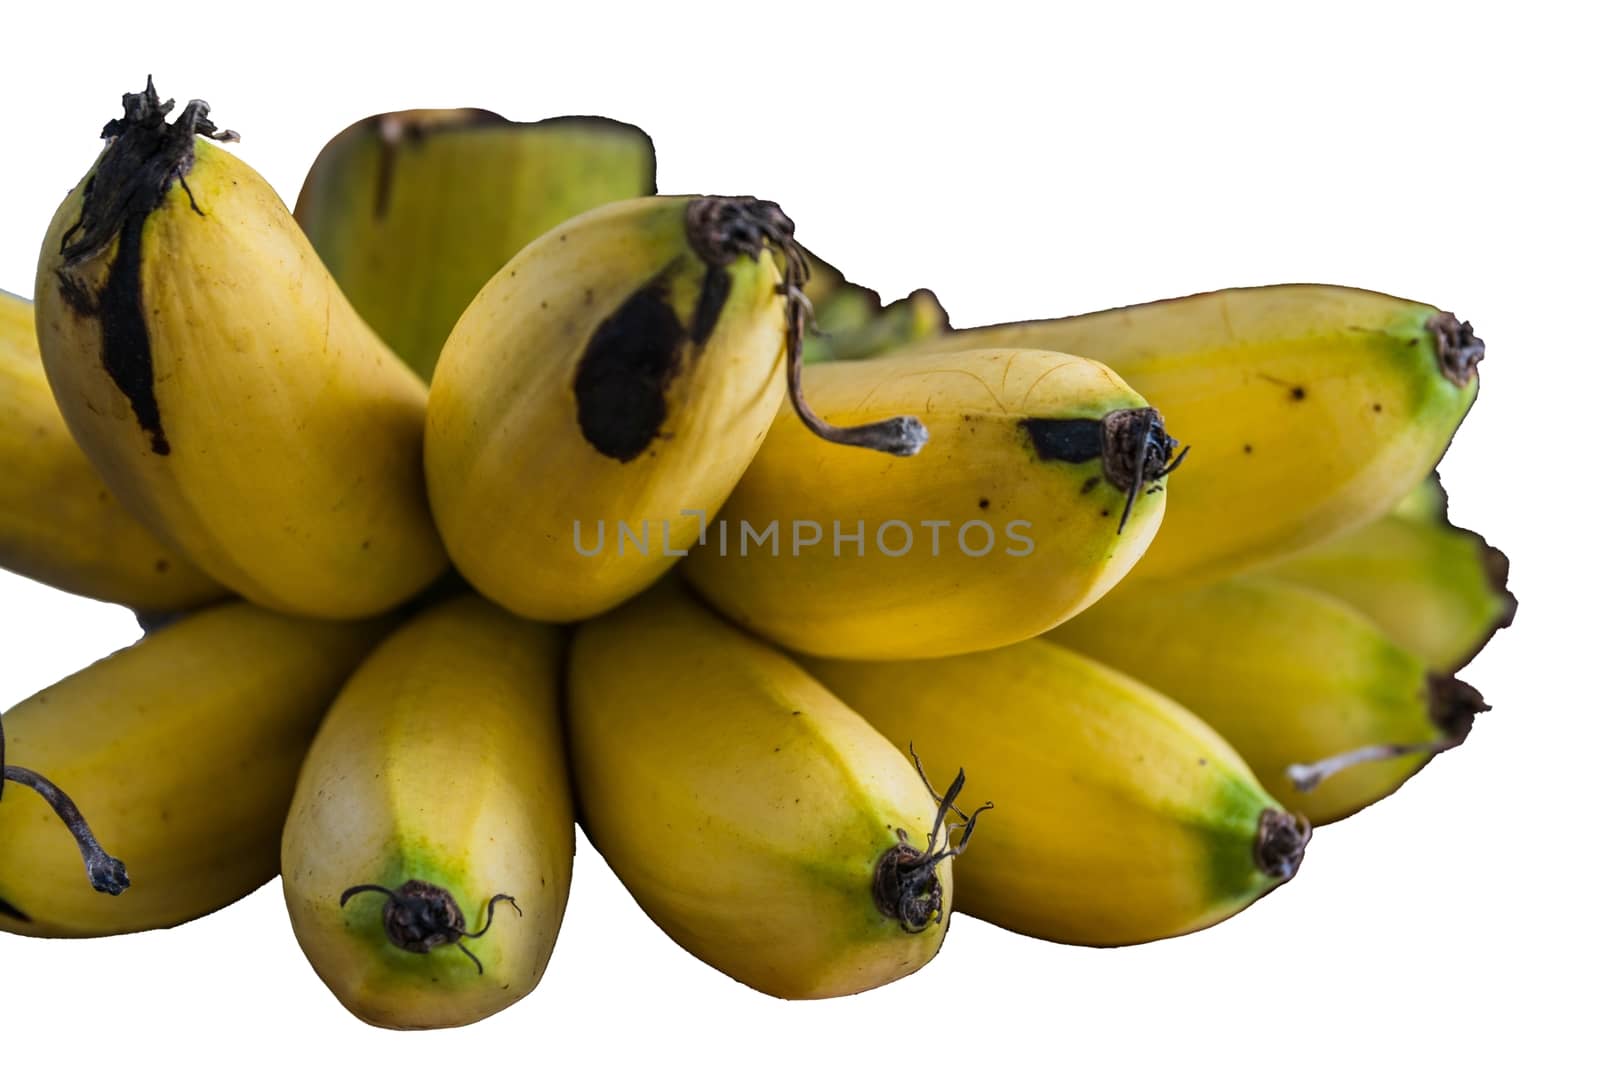 The Bunch of bananas isolated on white background